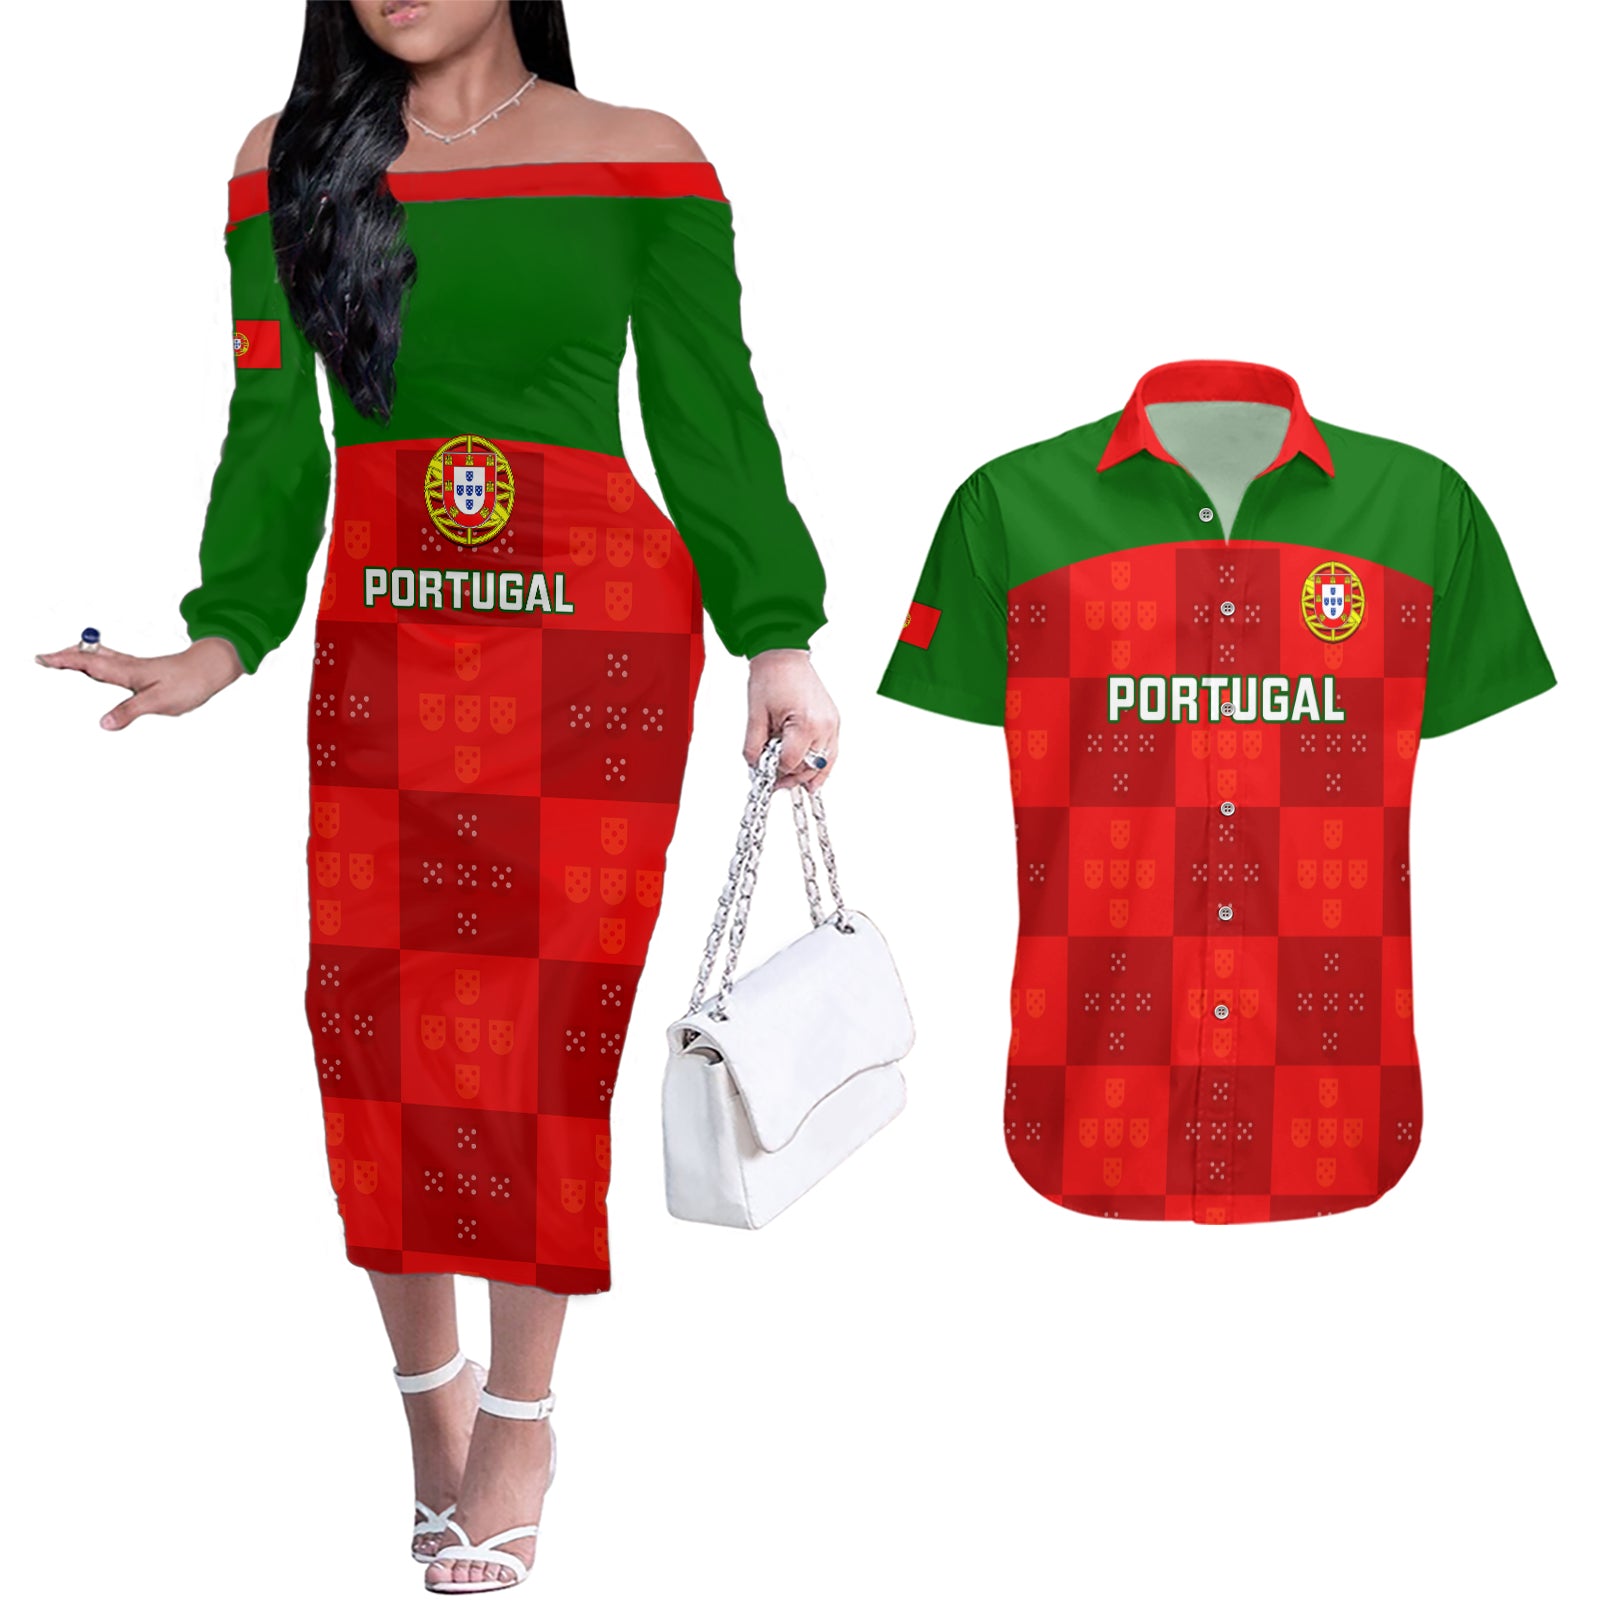 custom-portugal-rugby-couples-matching-off-the-shoulder-long-sleeve-dress-and-hawaiian-shirt-go-wolves-mix-coat-of-arms